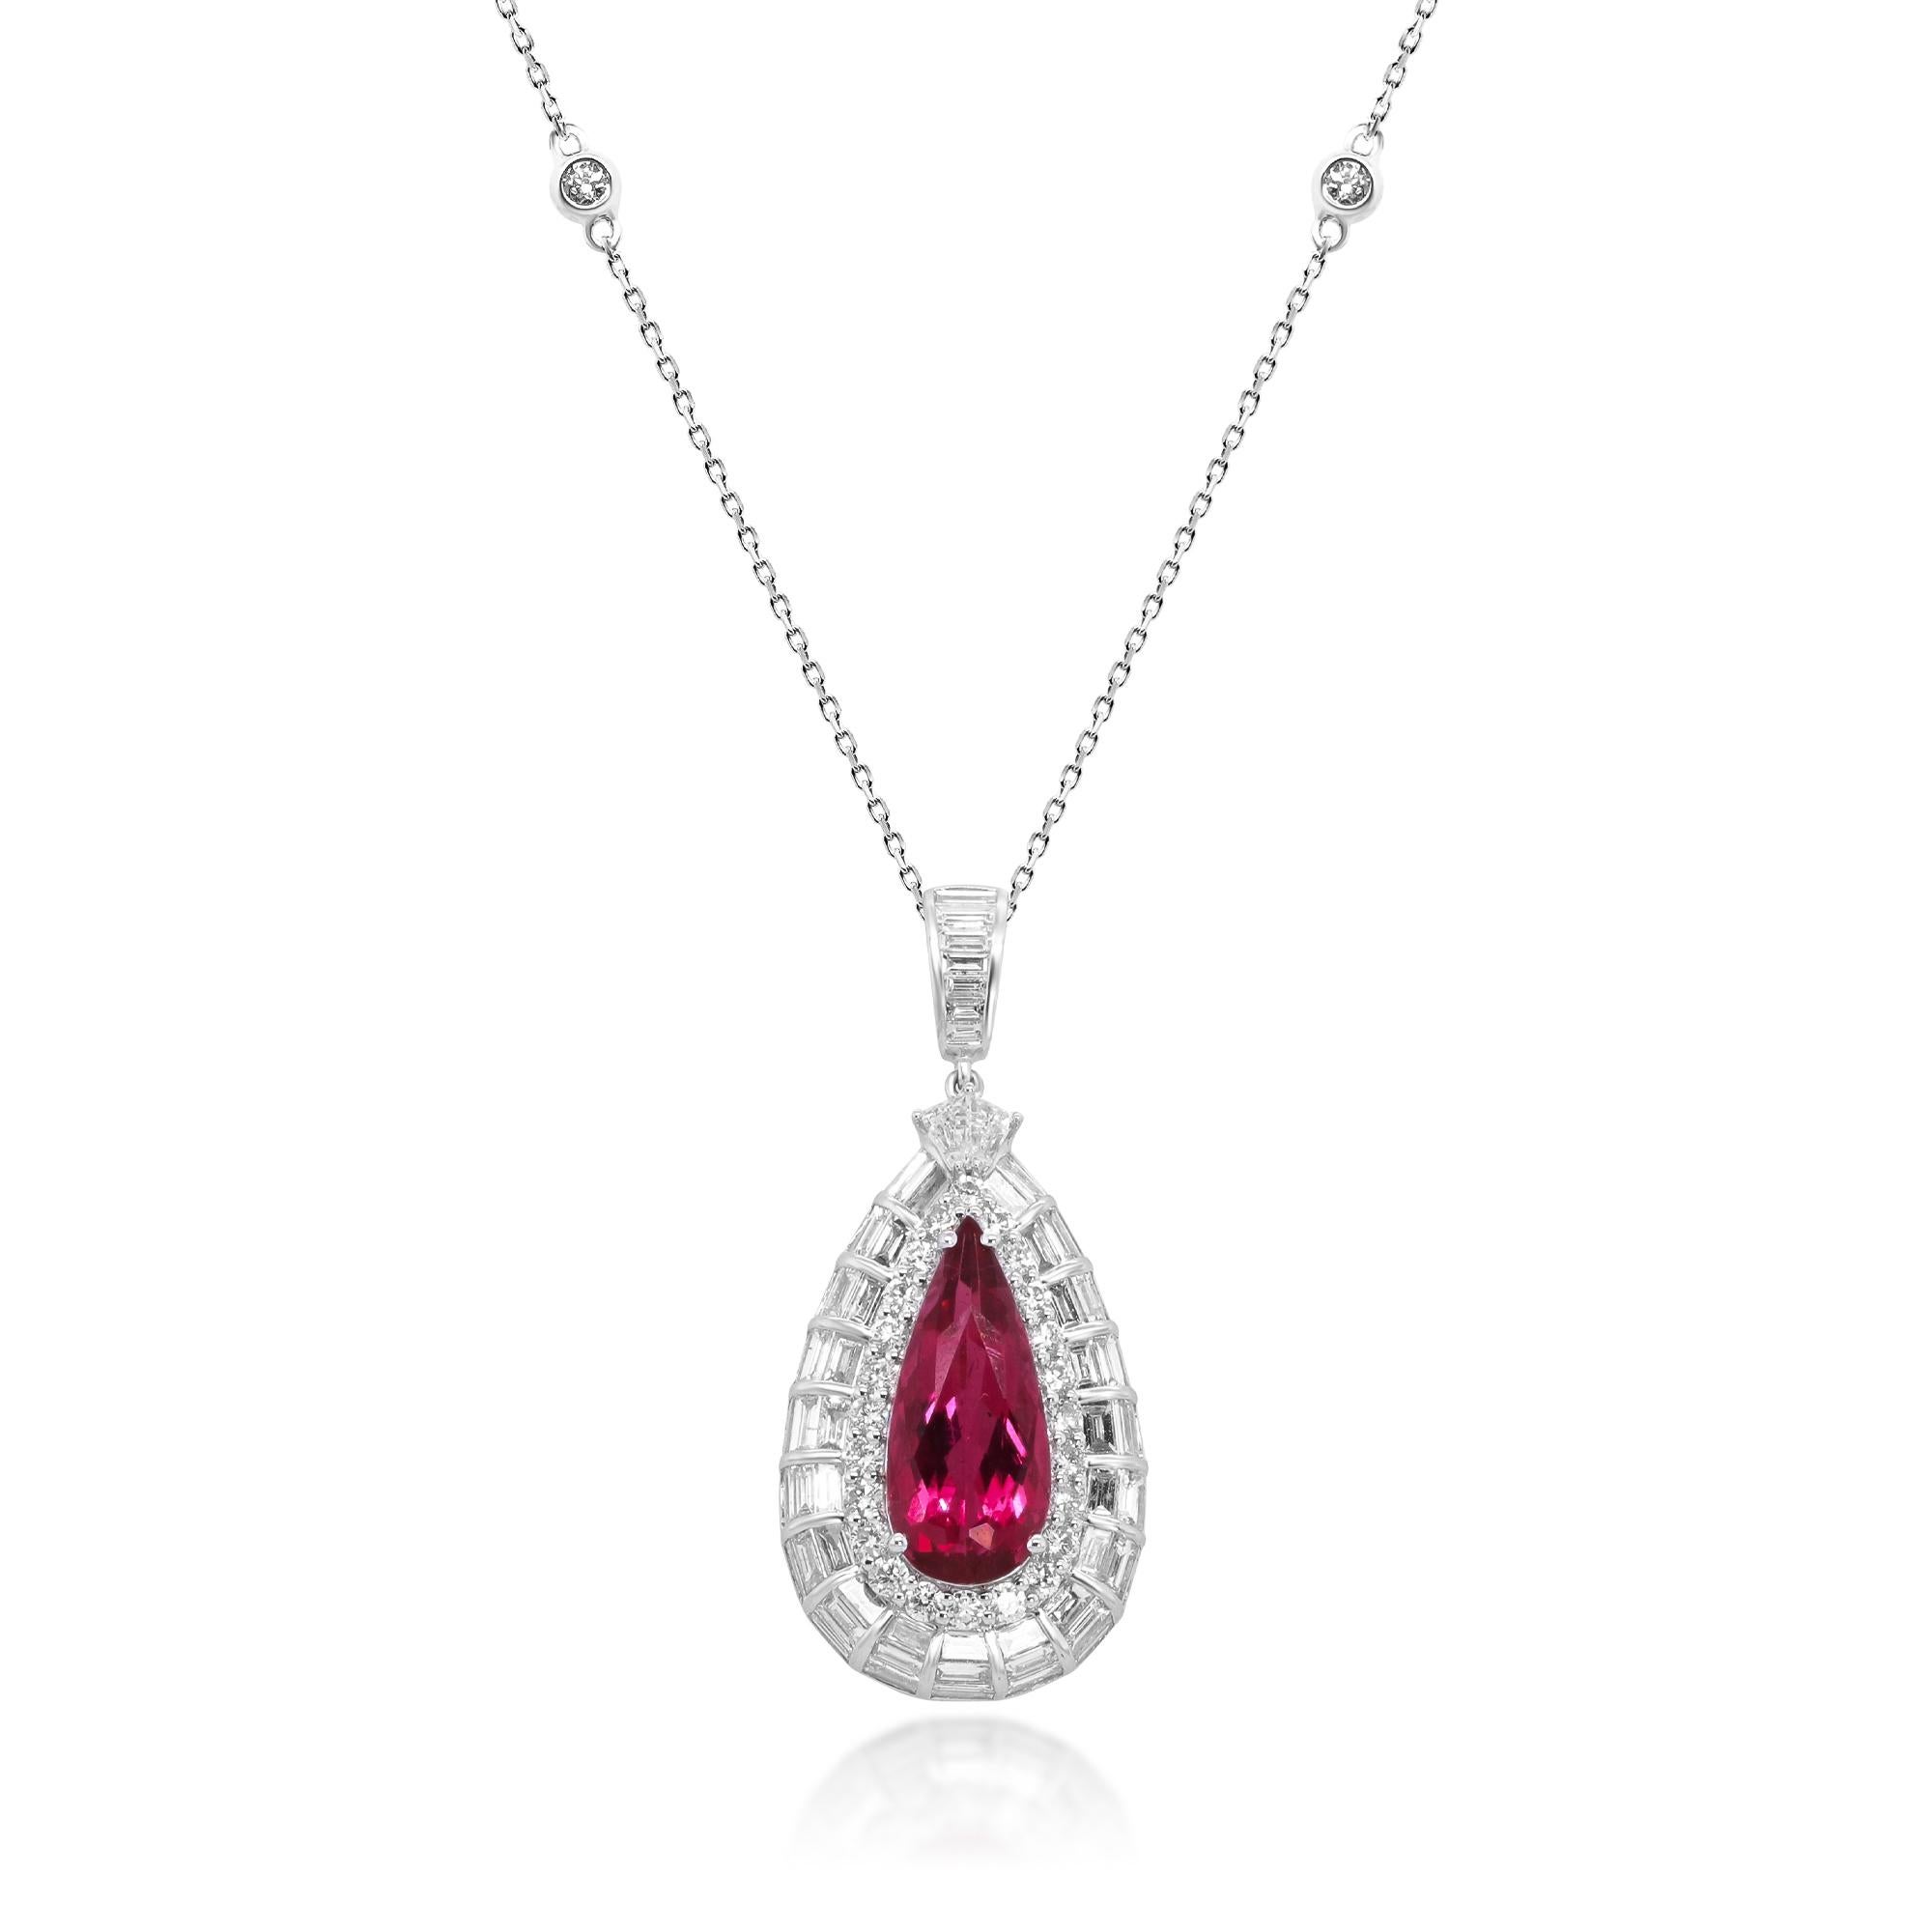 Stunning, timeless and classy eternity Unique Pendant. Decorate yourself in luxury with this Gin & Grace Pendant. The 18K White Gold jewelry boasts with Pear-cut (1 Pcs) 4.70 carat Rubelight and Natural  Baguette-cut (63 Pcs) 1.89 carat, Round-cut